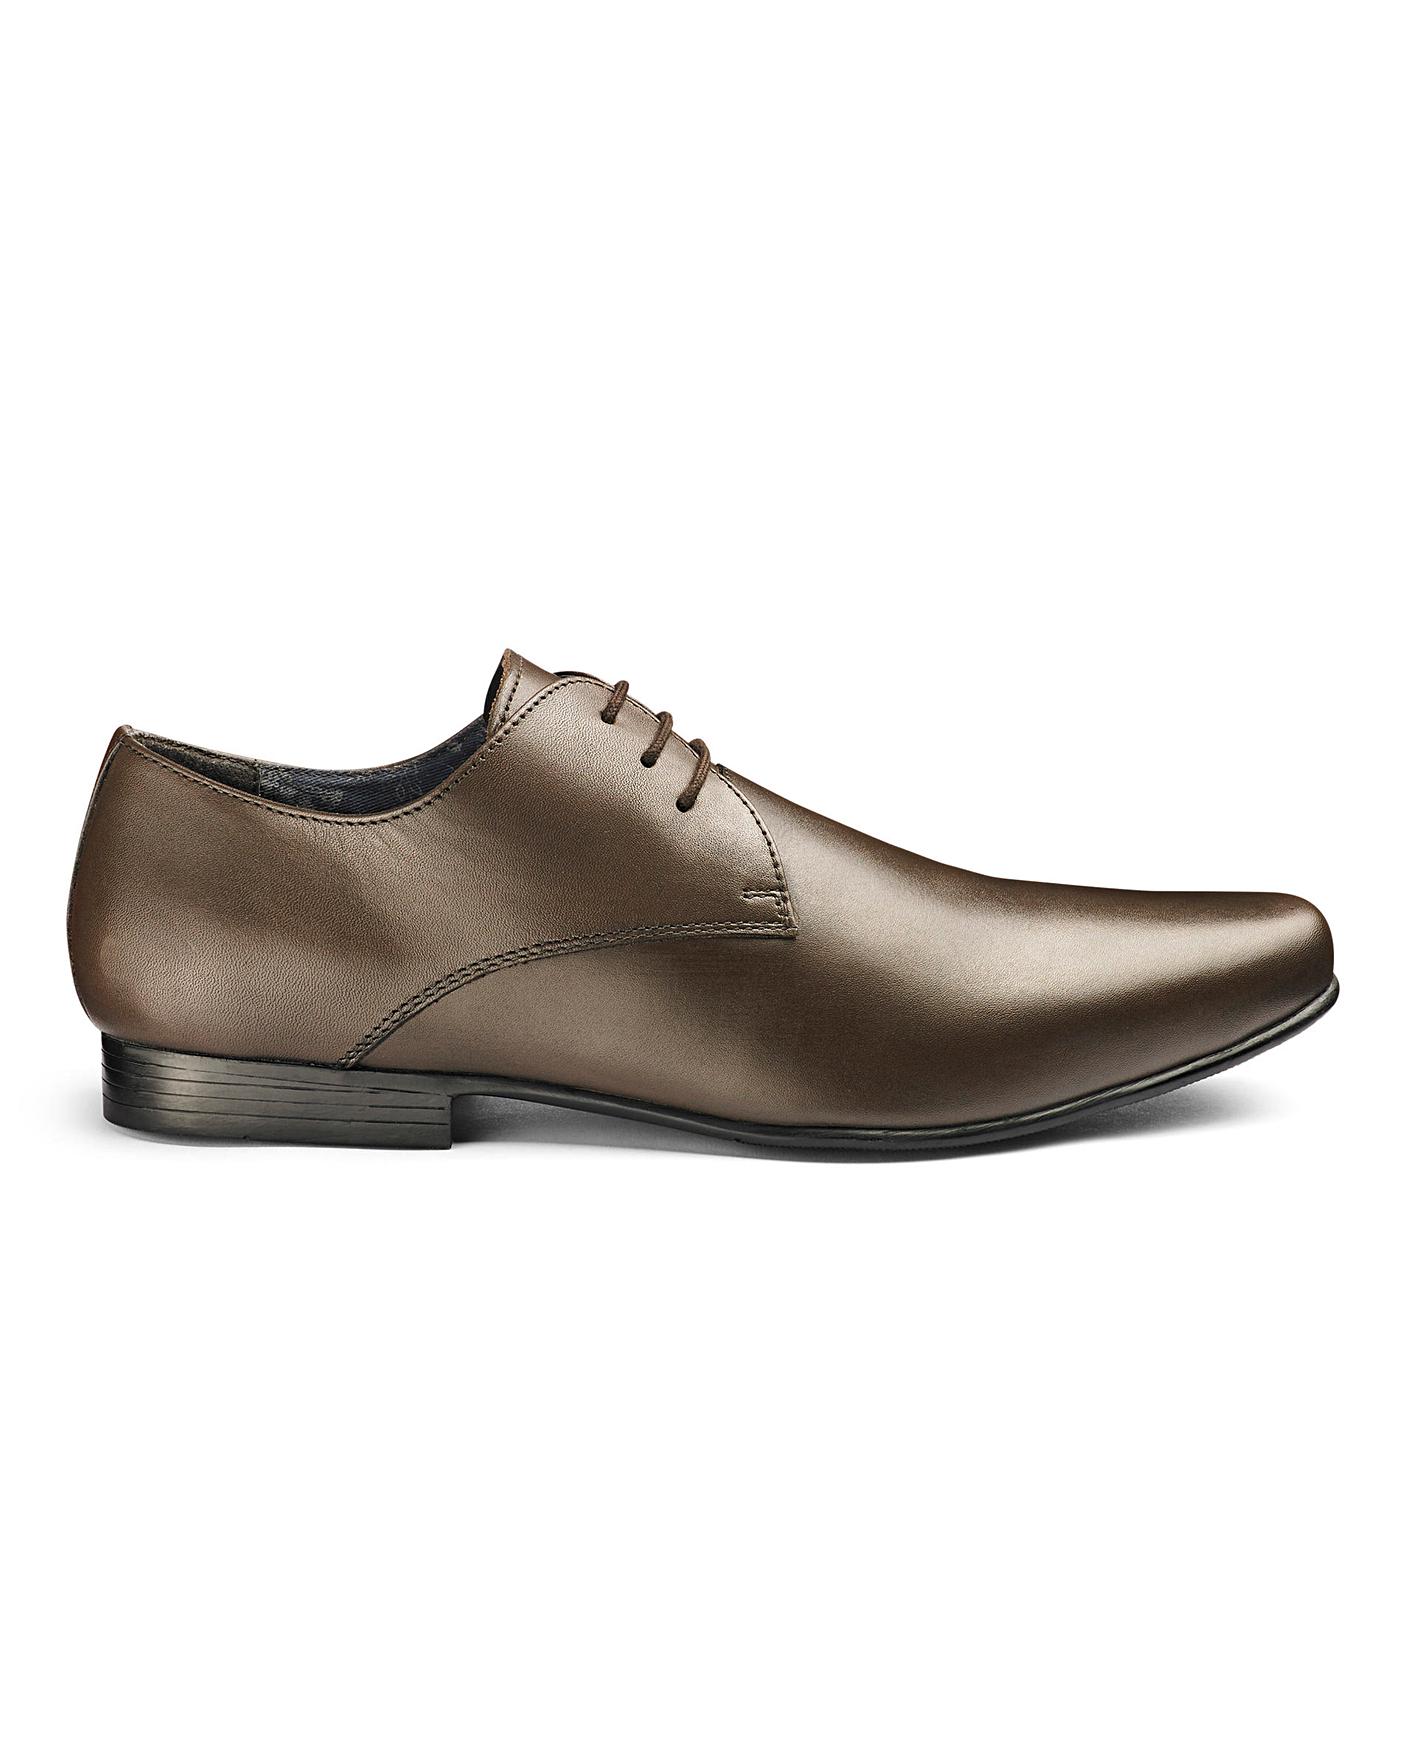 Trustyle Leather Derby Shoes Ex Wide 